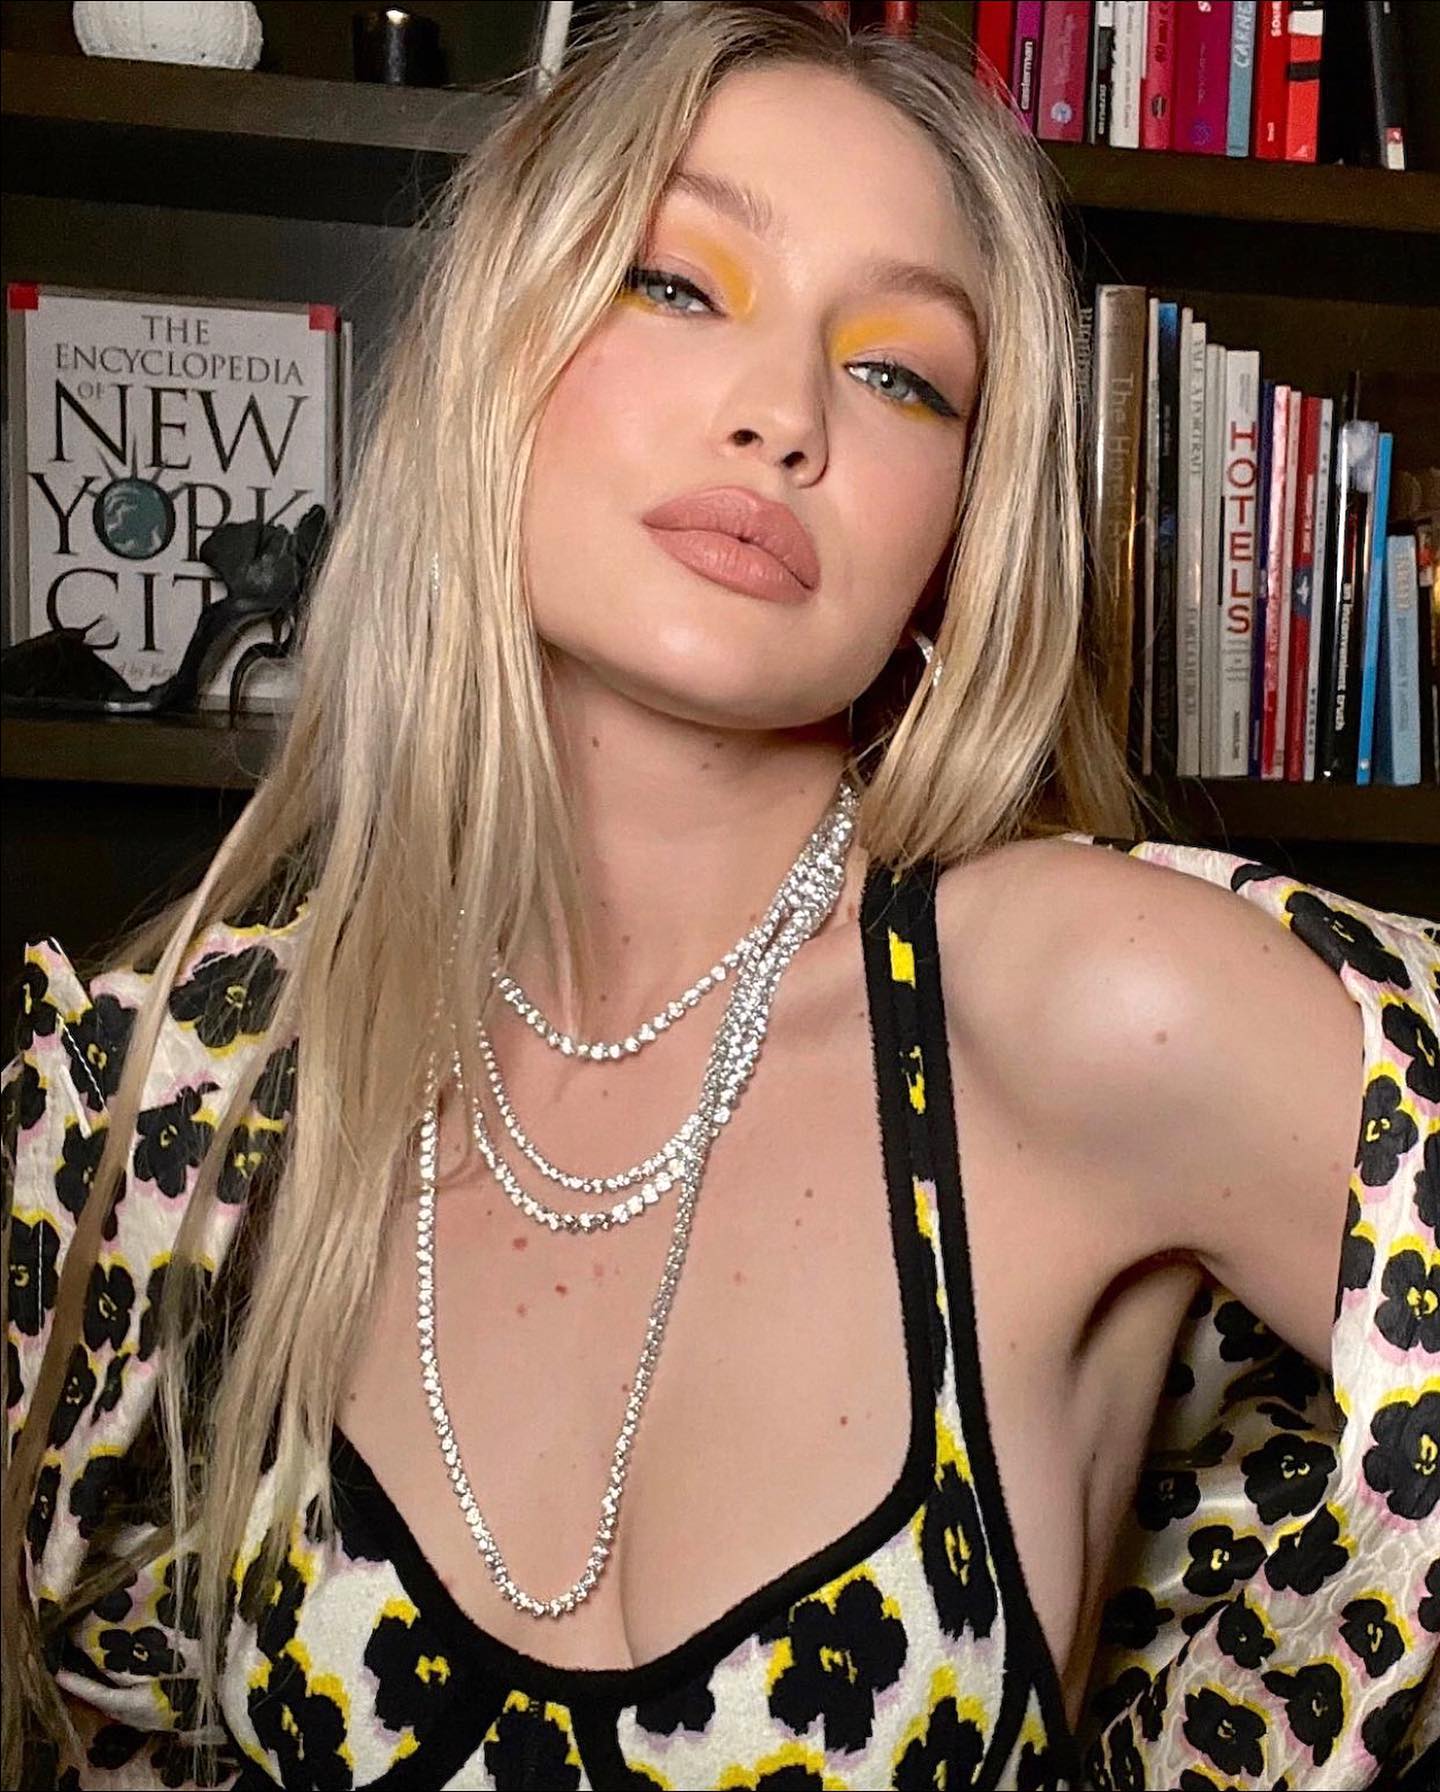 Know About Gigi Hadid Age, Height, Weight, Boyfriend, Family, Body Measurements, Bra Size